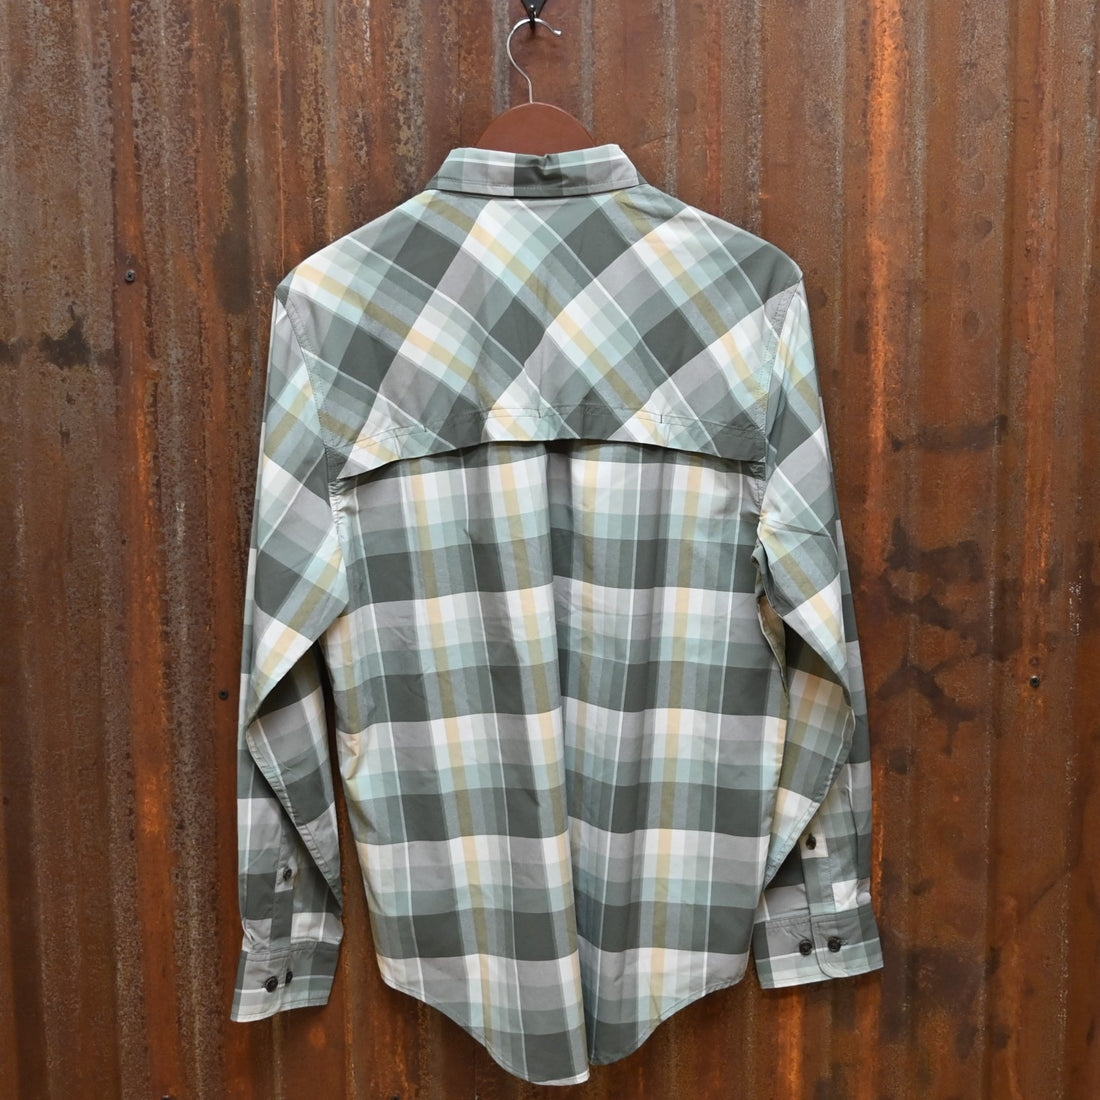 Filson Twin Lakes Sports Shirt in Olive, White and Gold Plaid by Filson view of back